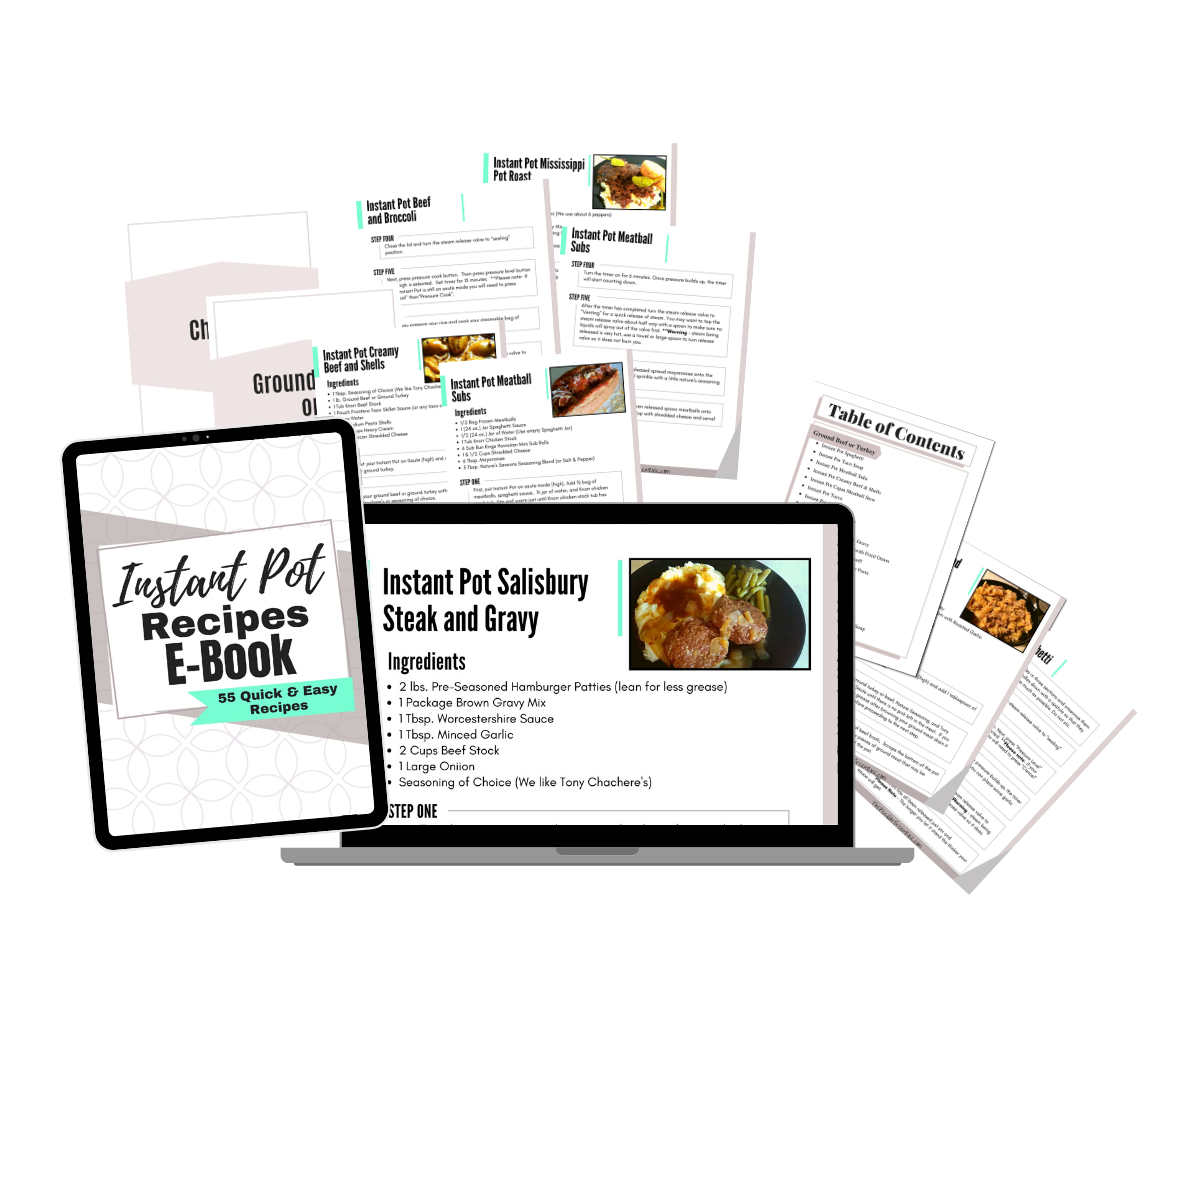 A Instant Pot Recipe Ebook displayed on a tablet, laptop, and pdf print outs.